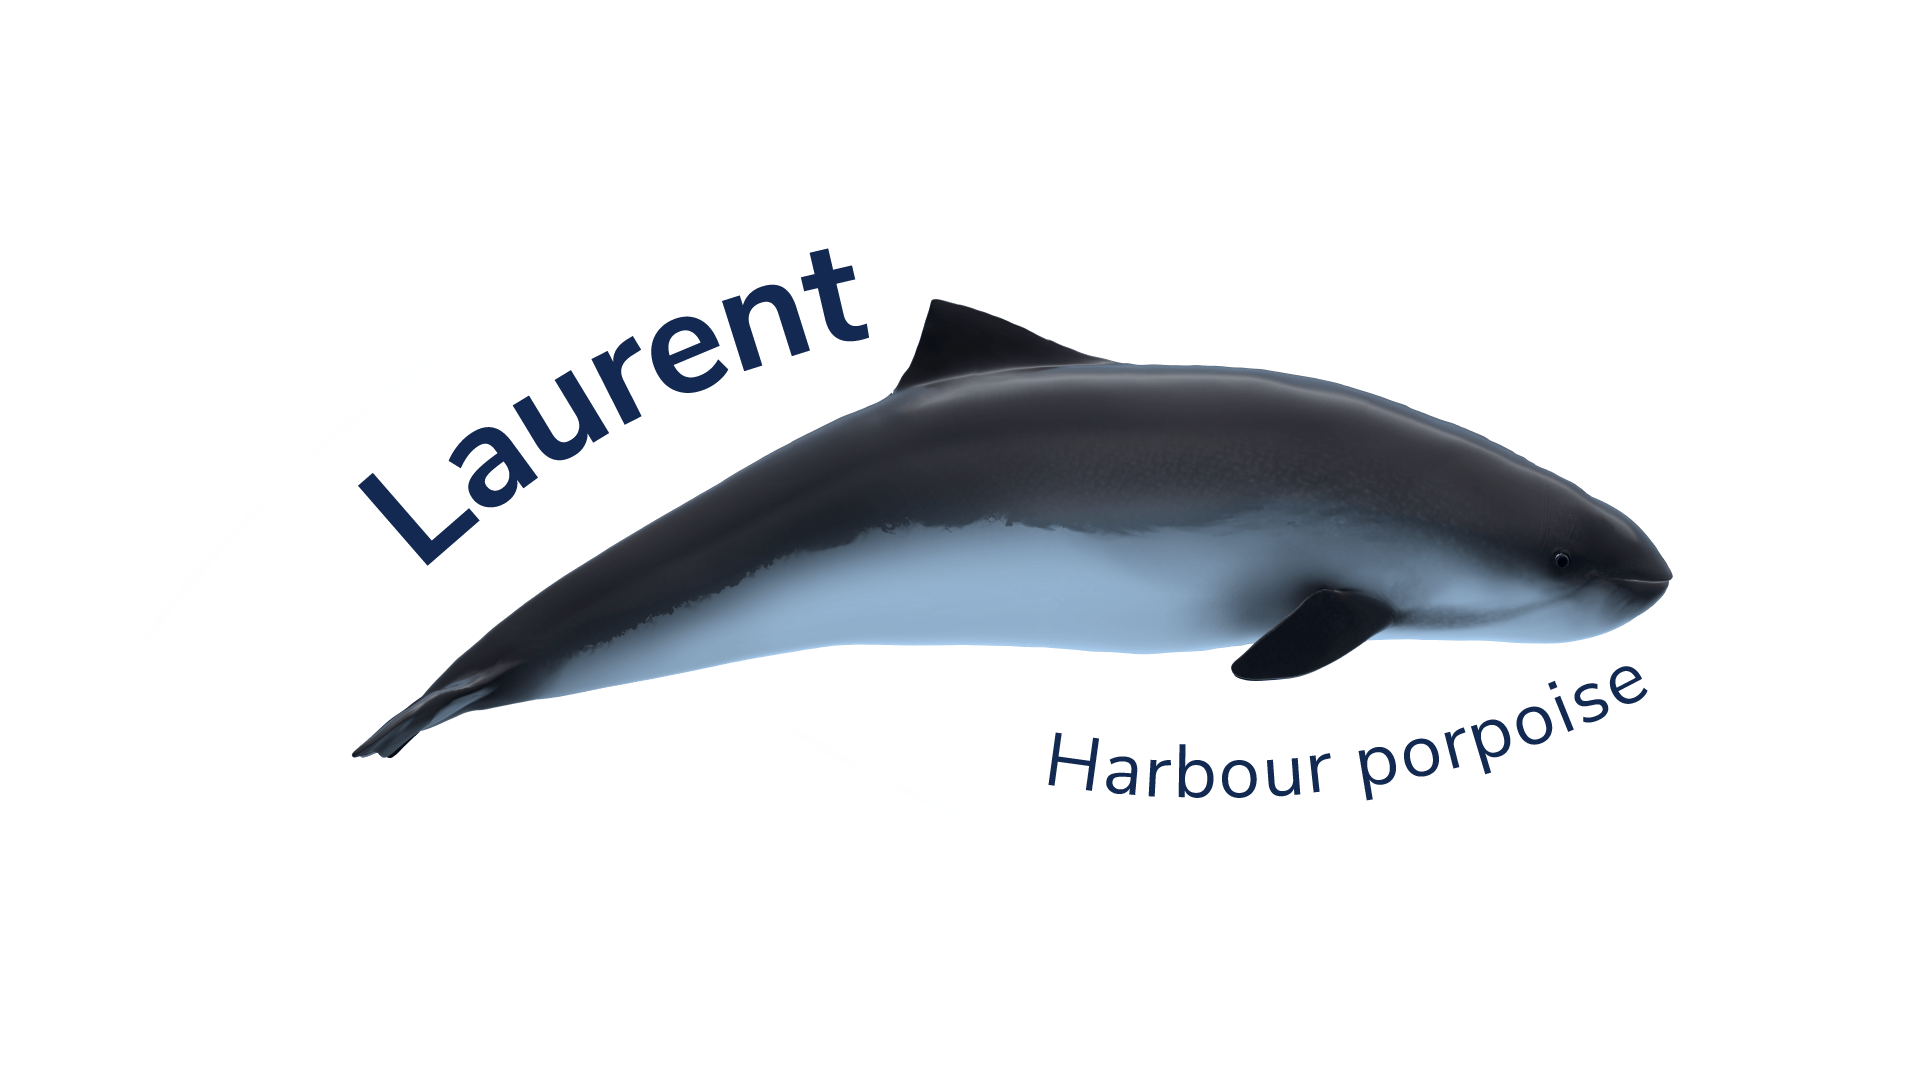 The harbour porpoise Lawrence